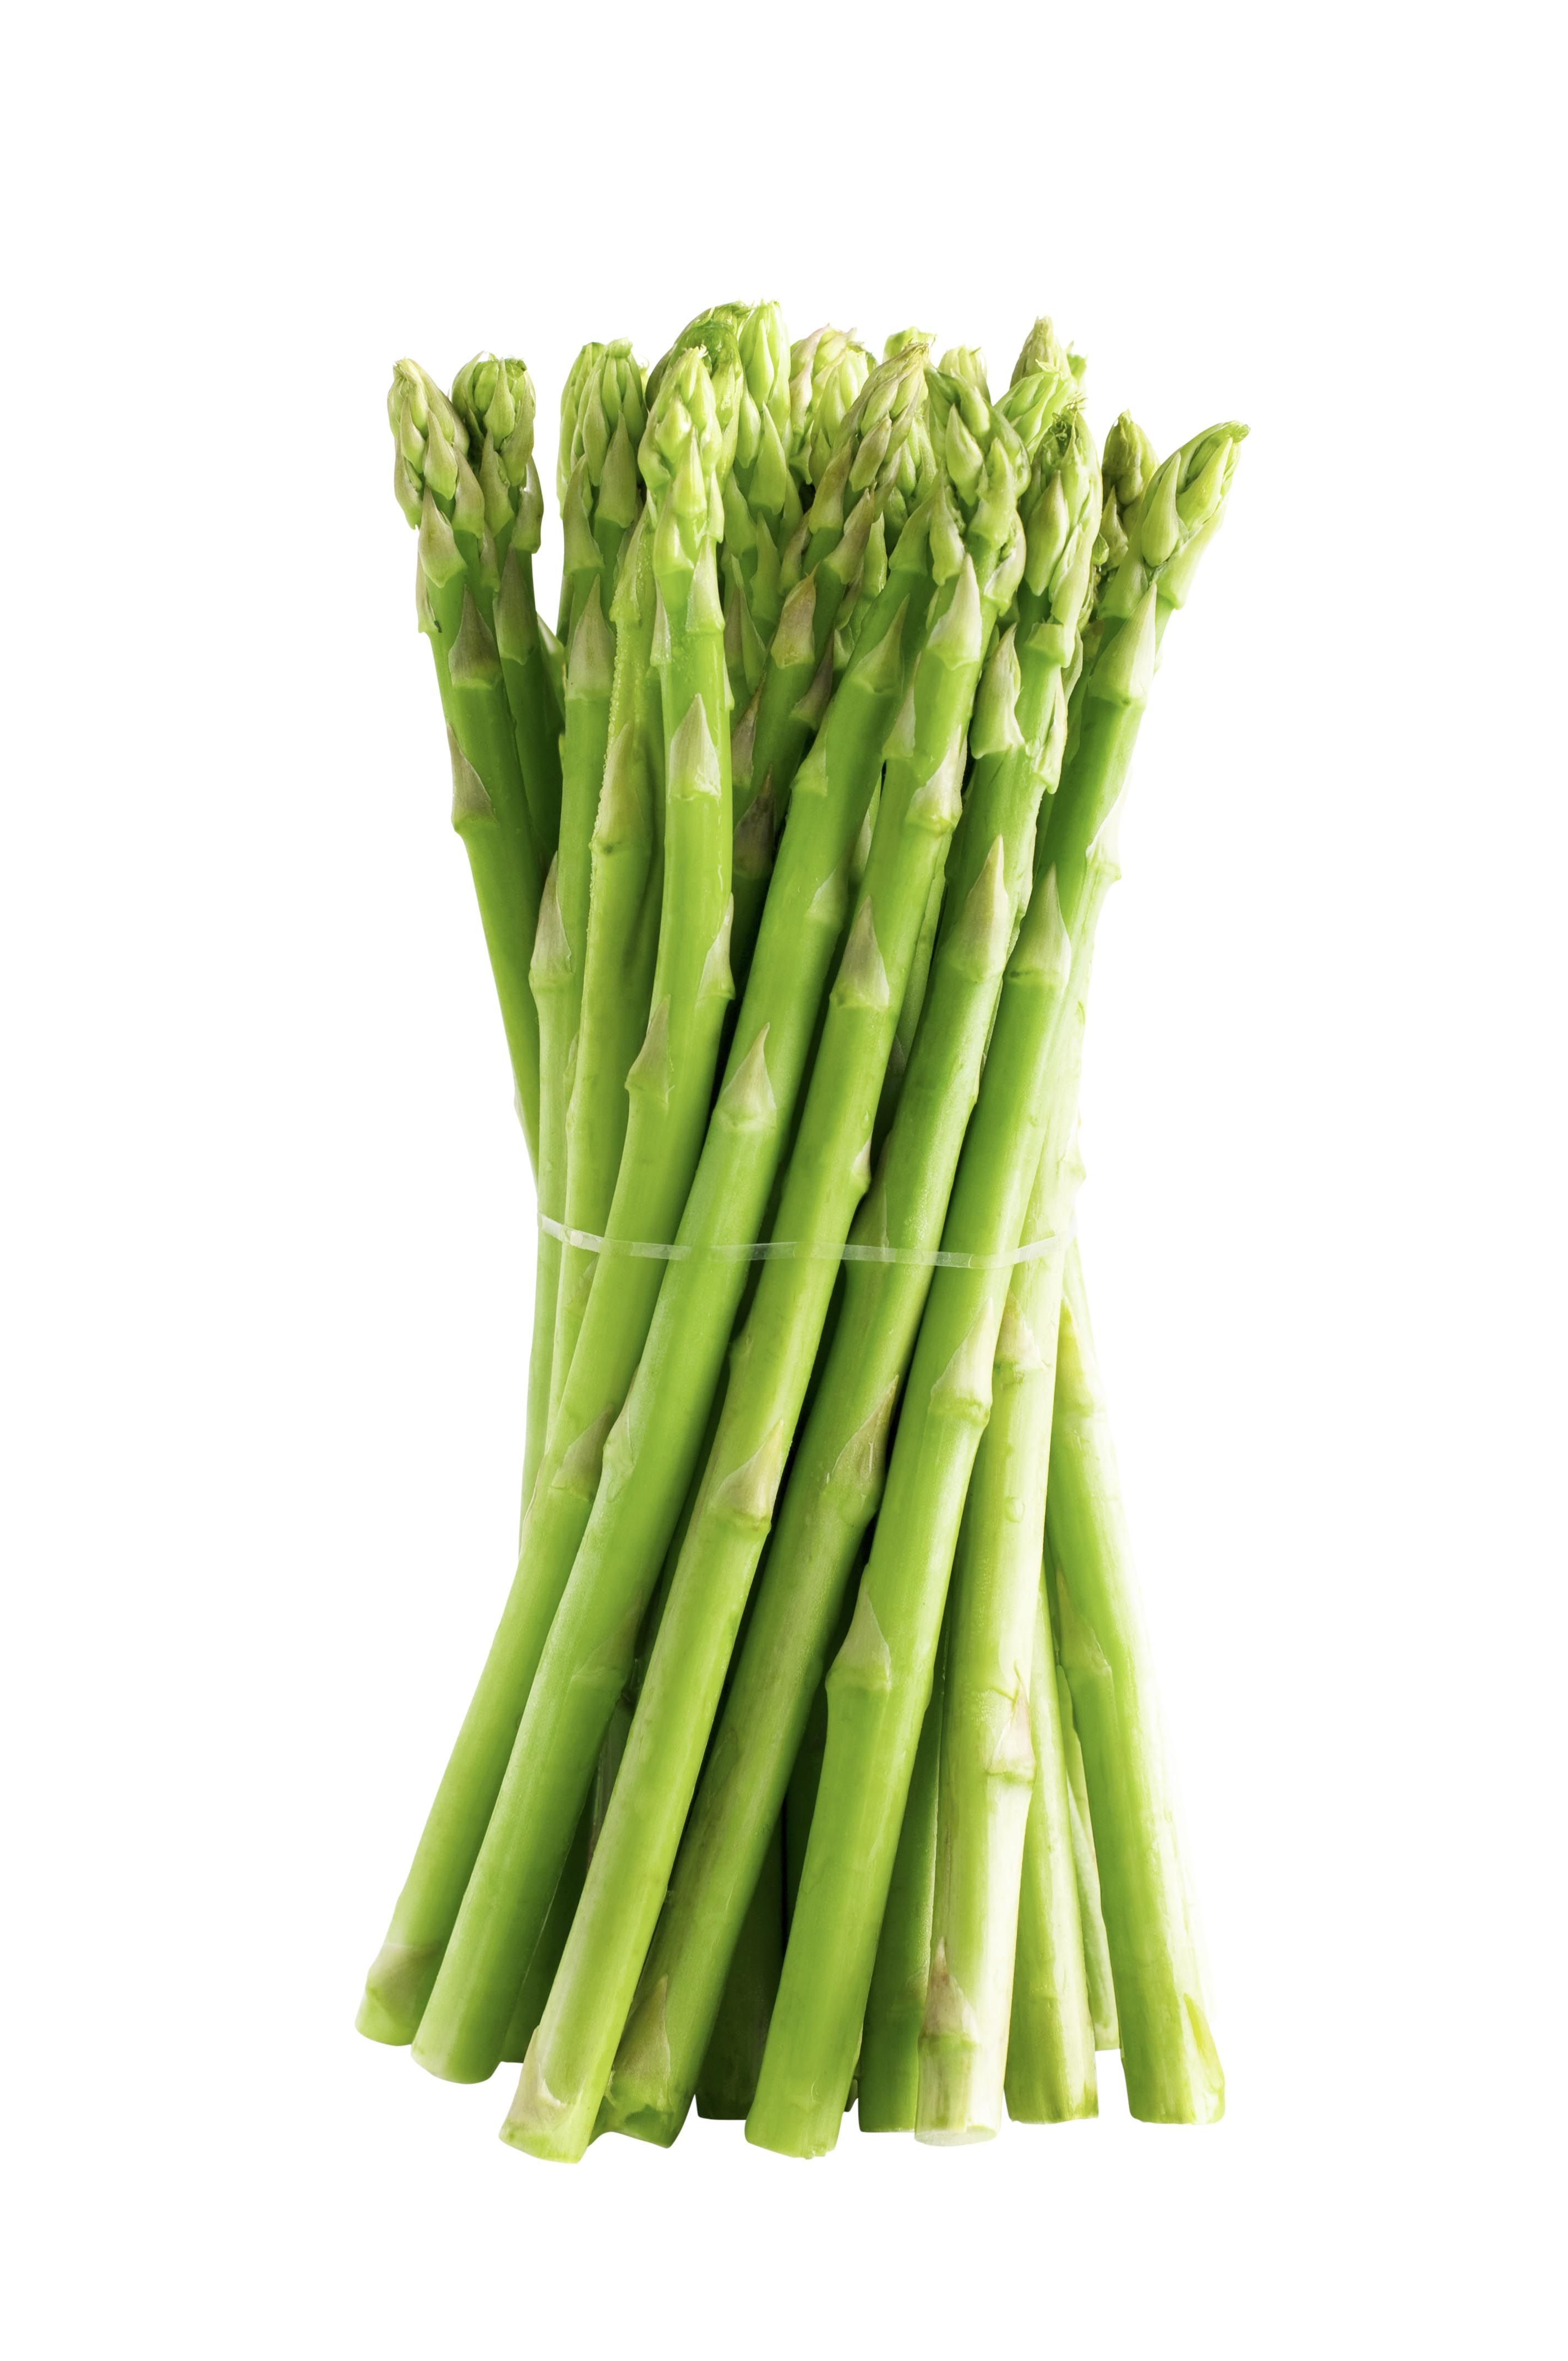 Close-Up Of Asparagus Against White Background